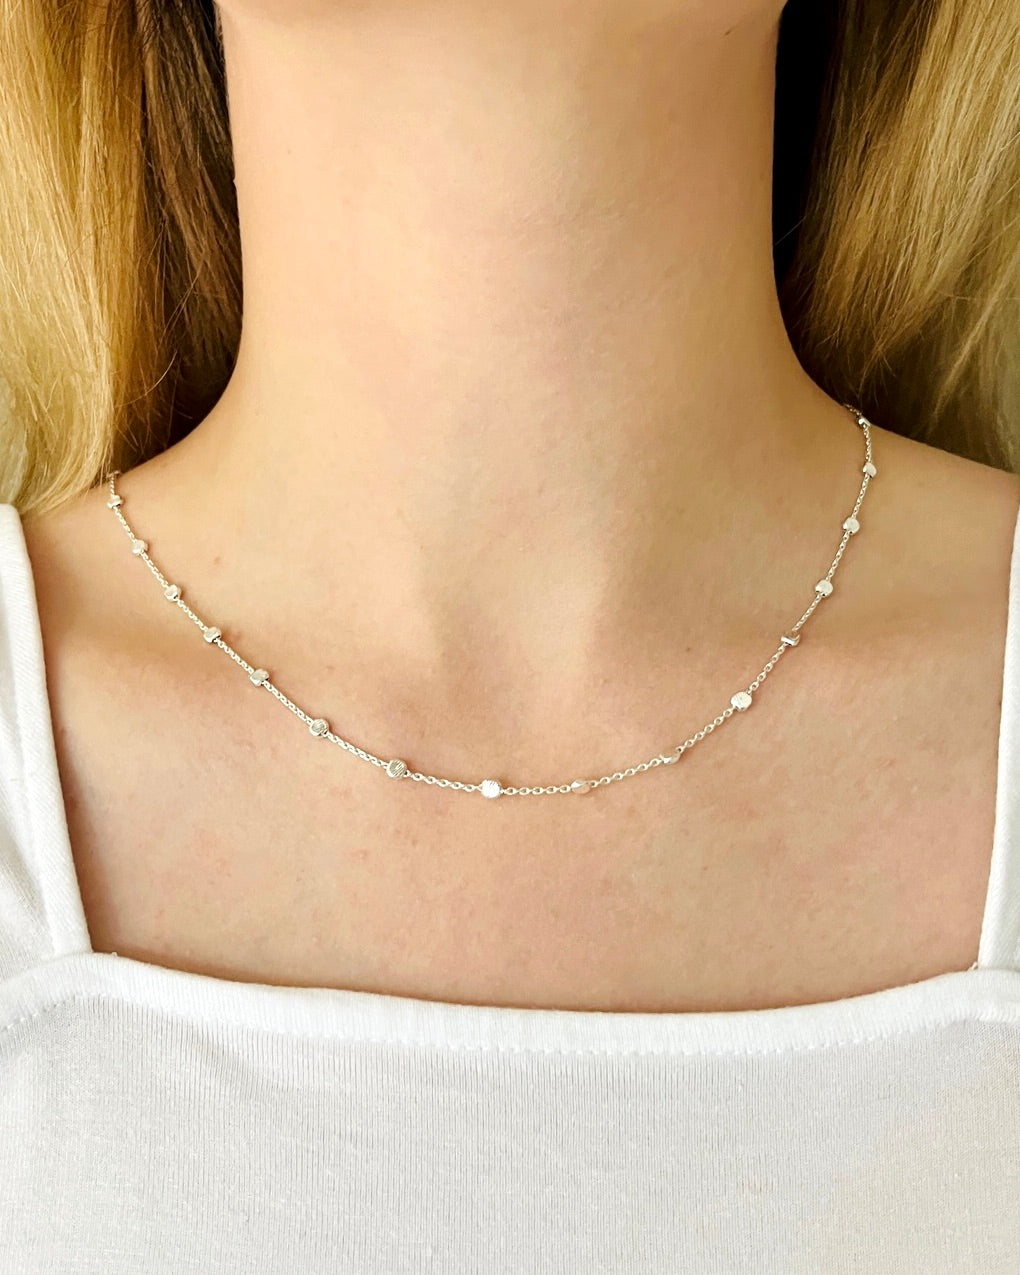 Dainty Sterling Silver Beaded Necklace, Silver Beads Bar Necklace